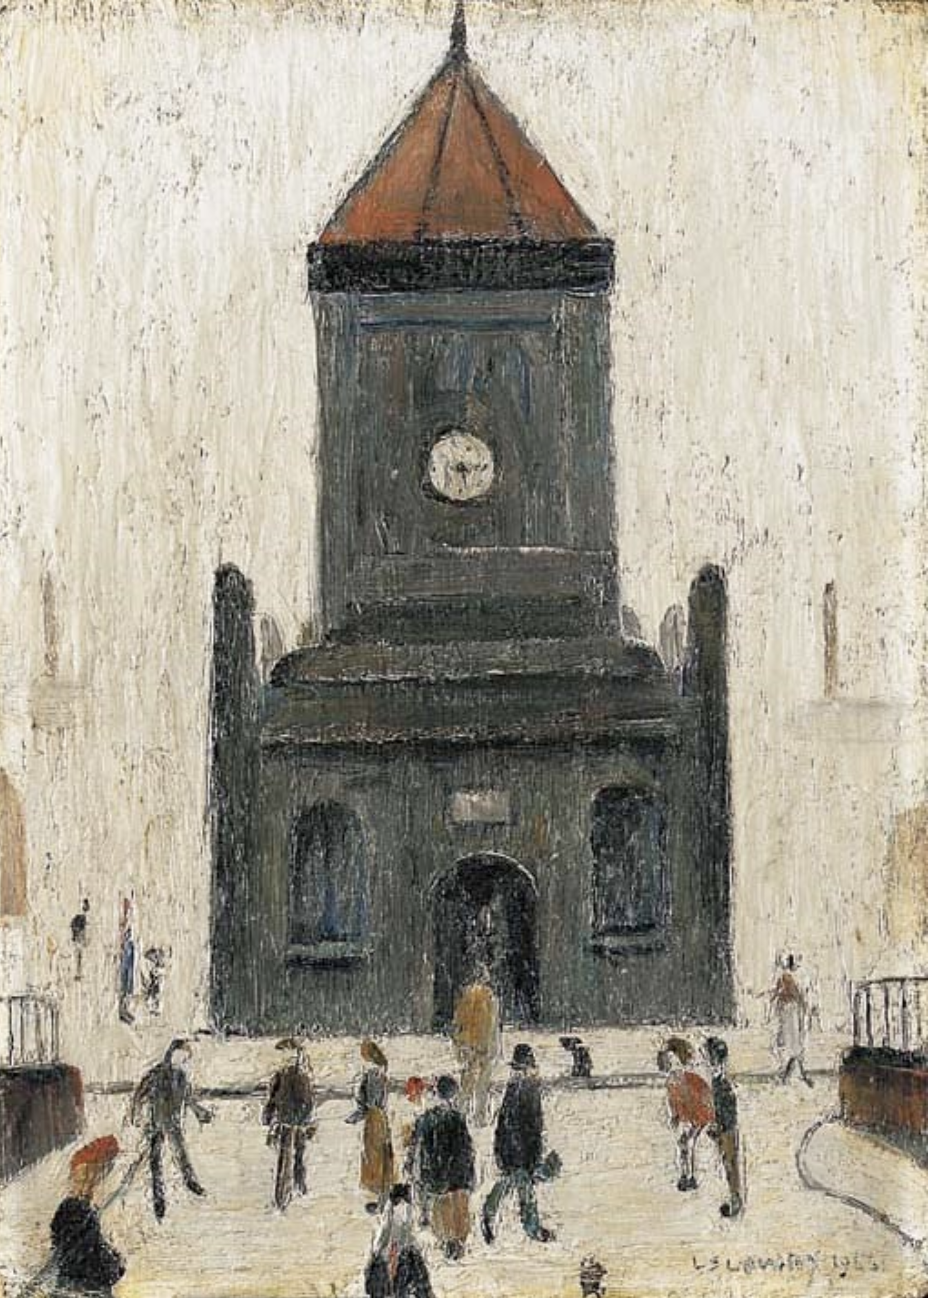 A Church (1966) by Laurence Stephen Lowry (1887 - 1976), English artist.